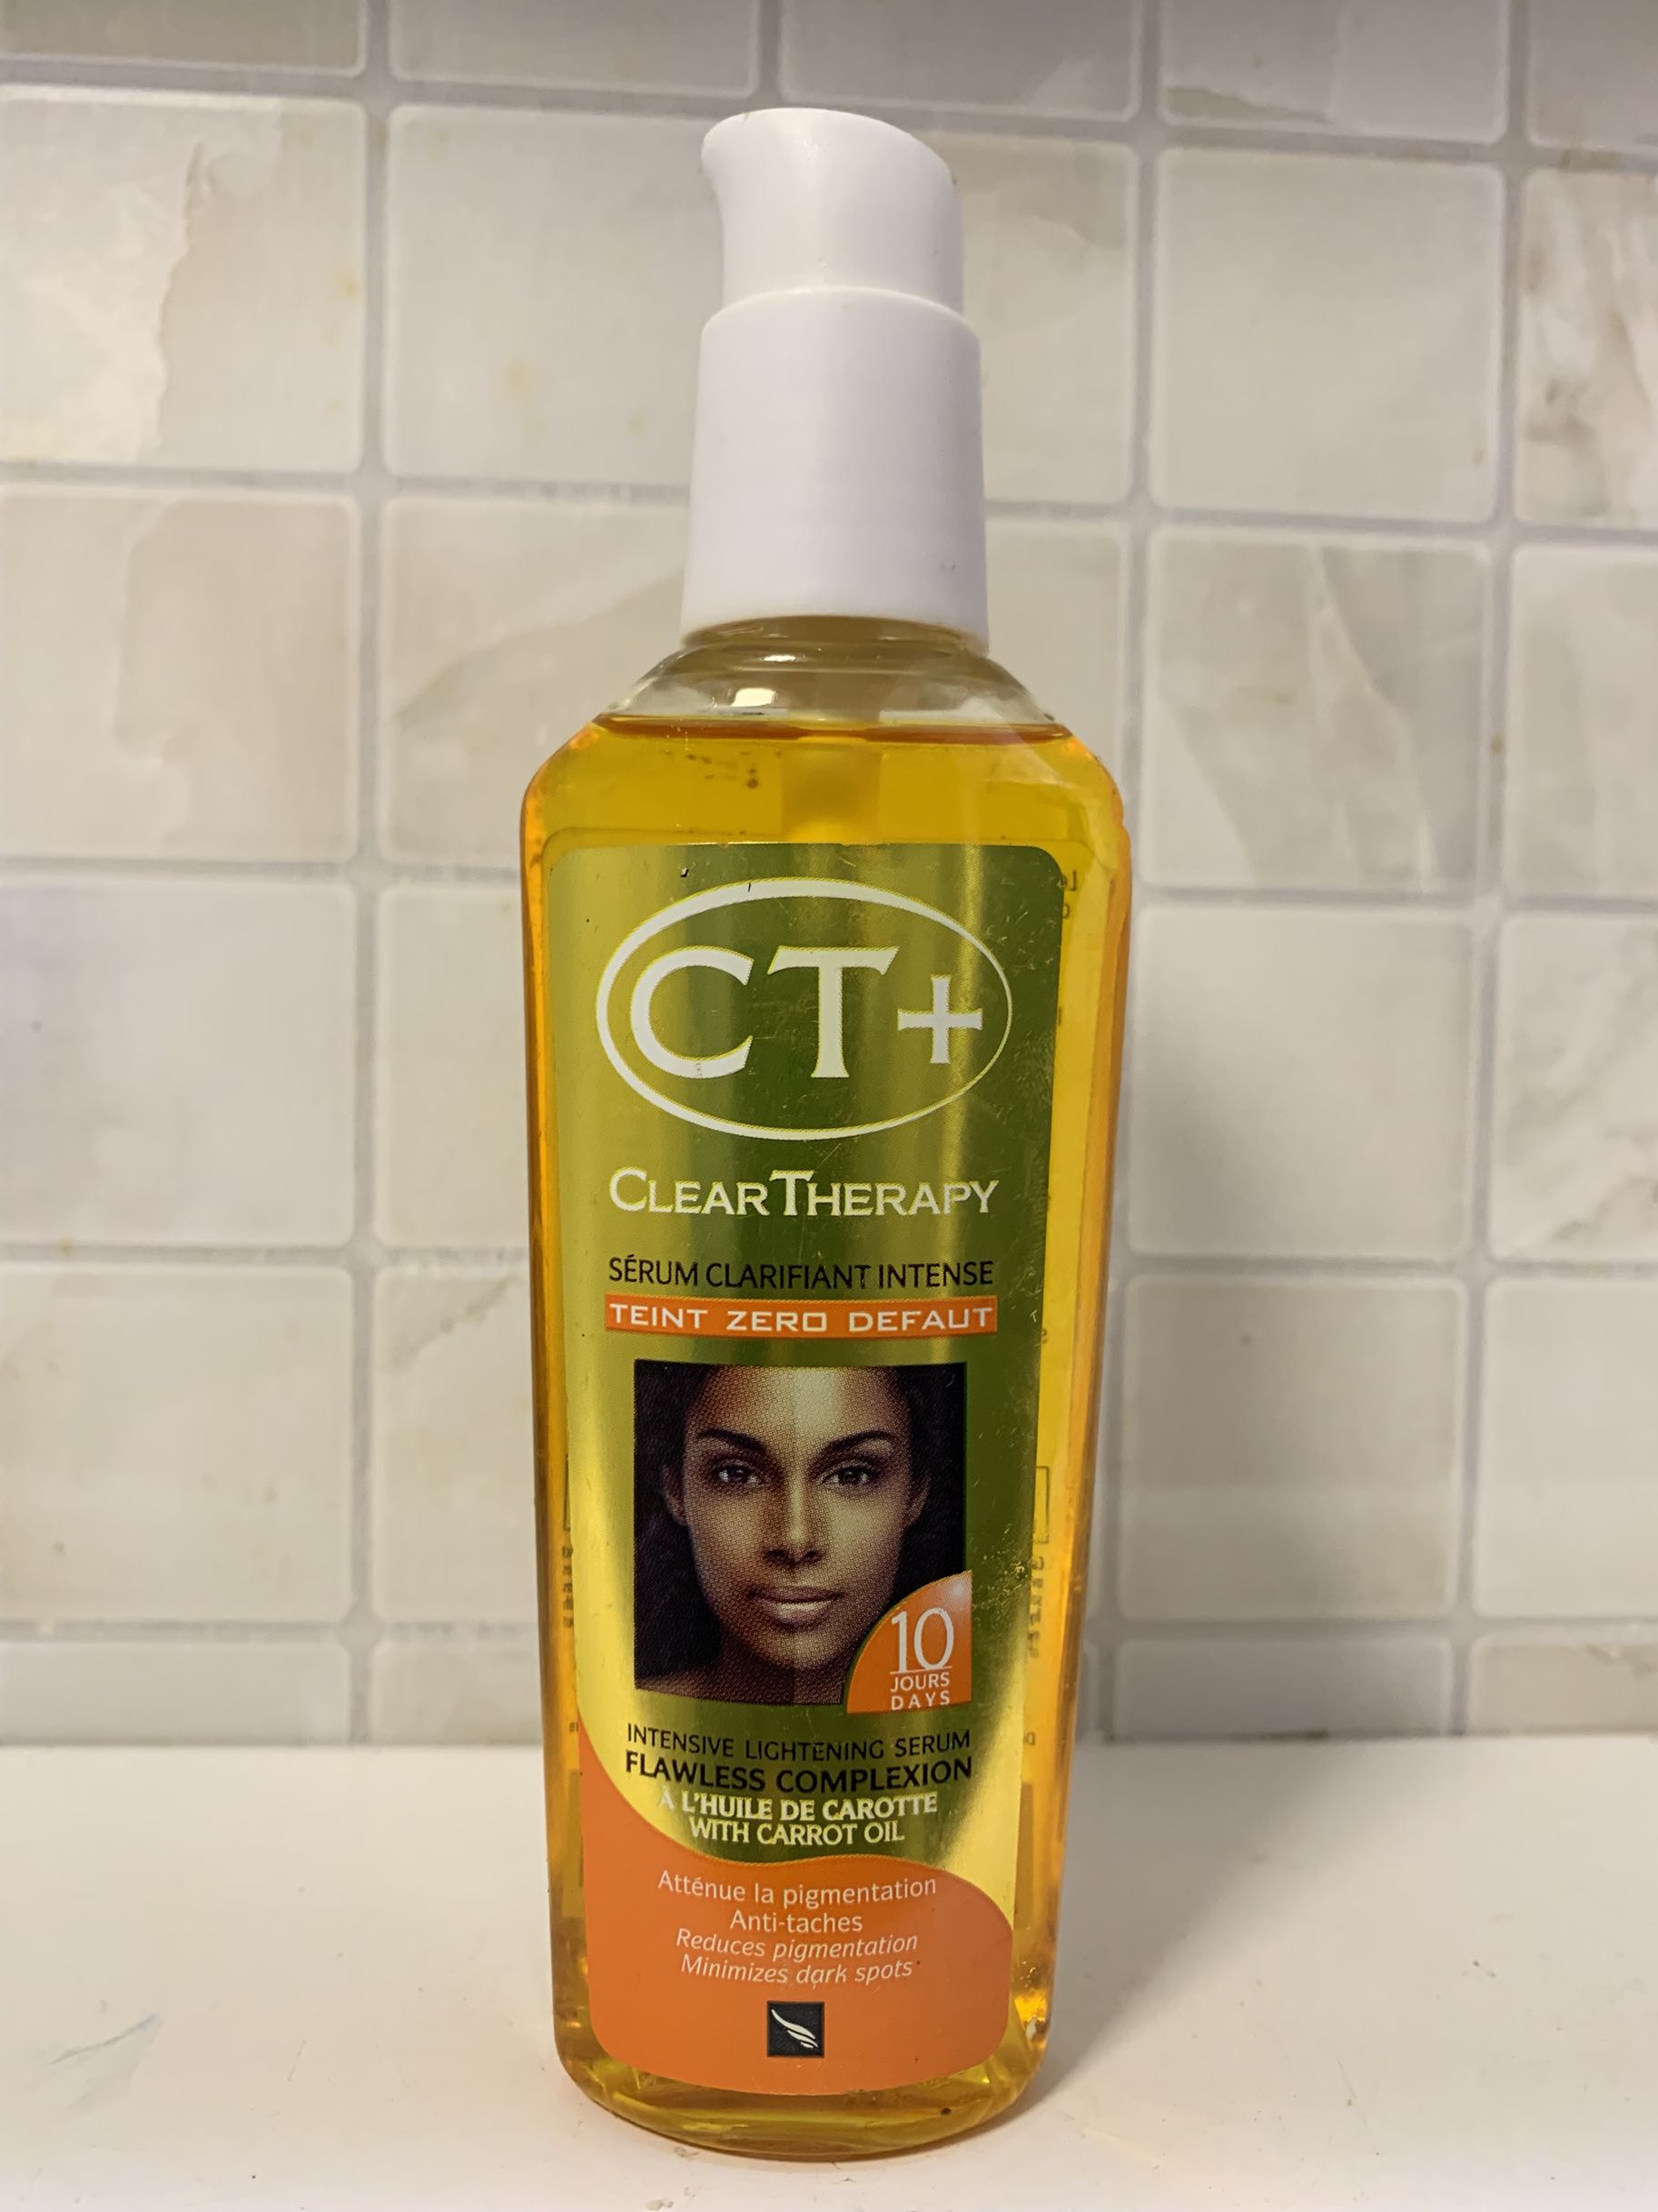 CT+ Clear Therapy | Serum Clarifiant | Flawless Complexion /75ml